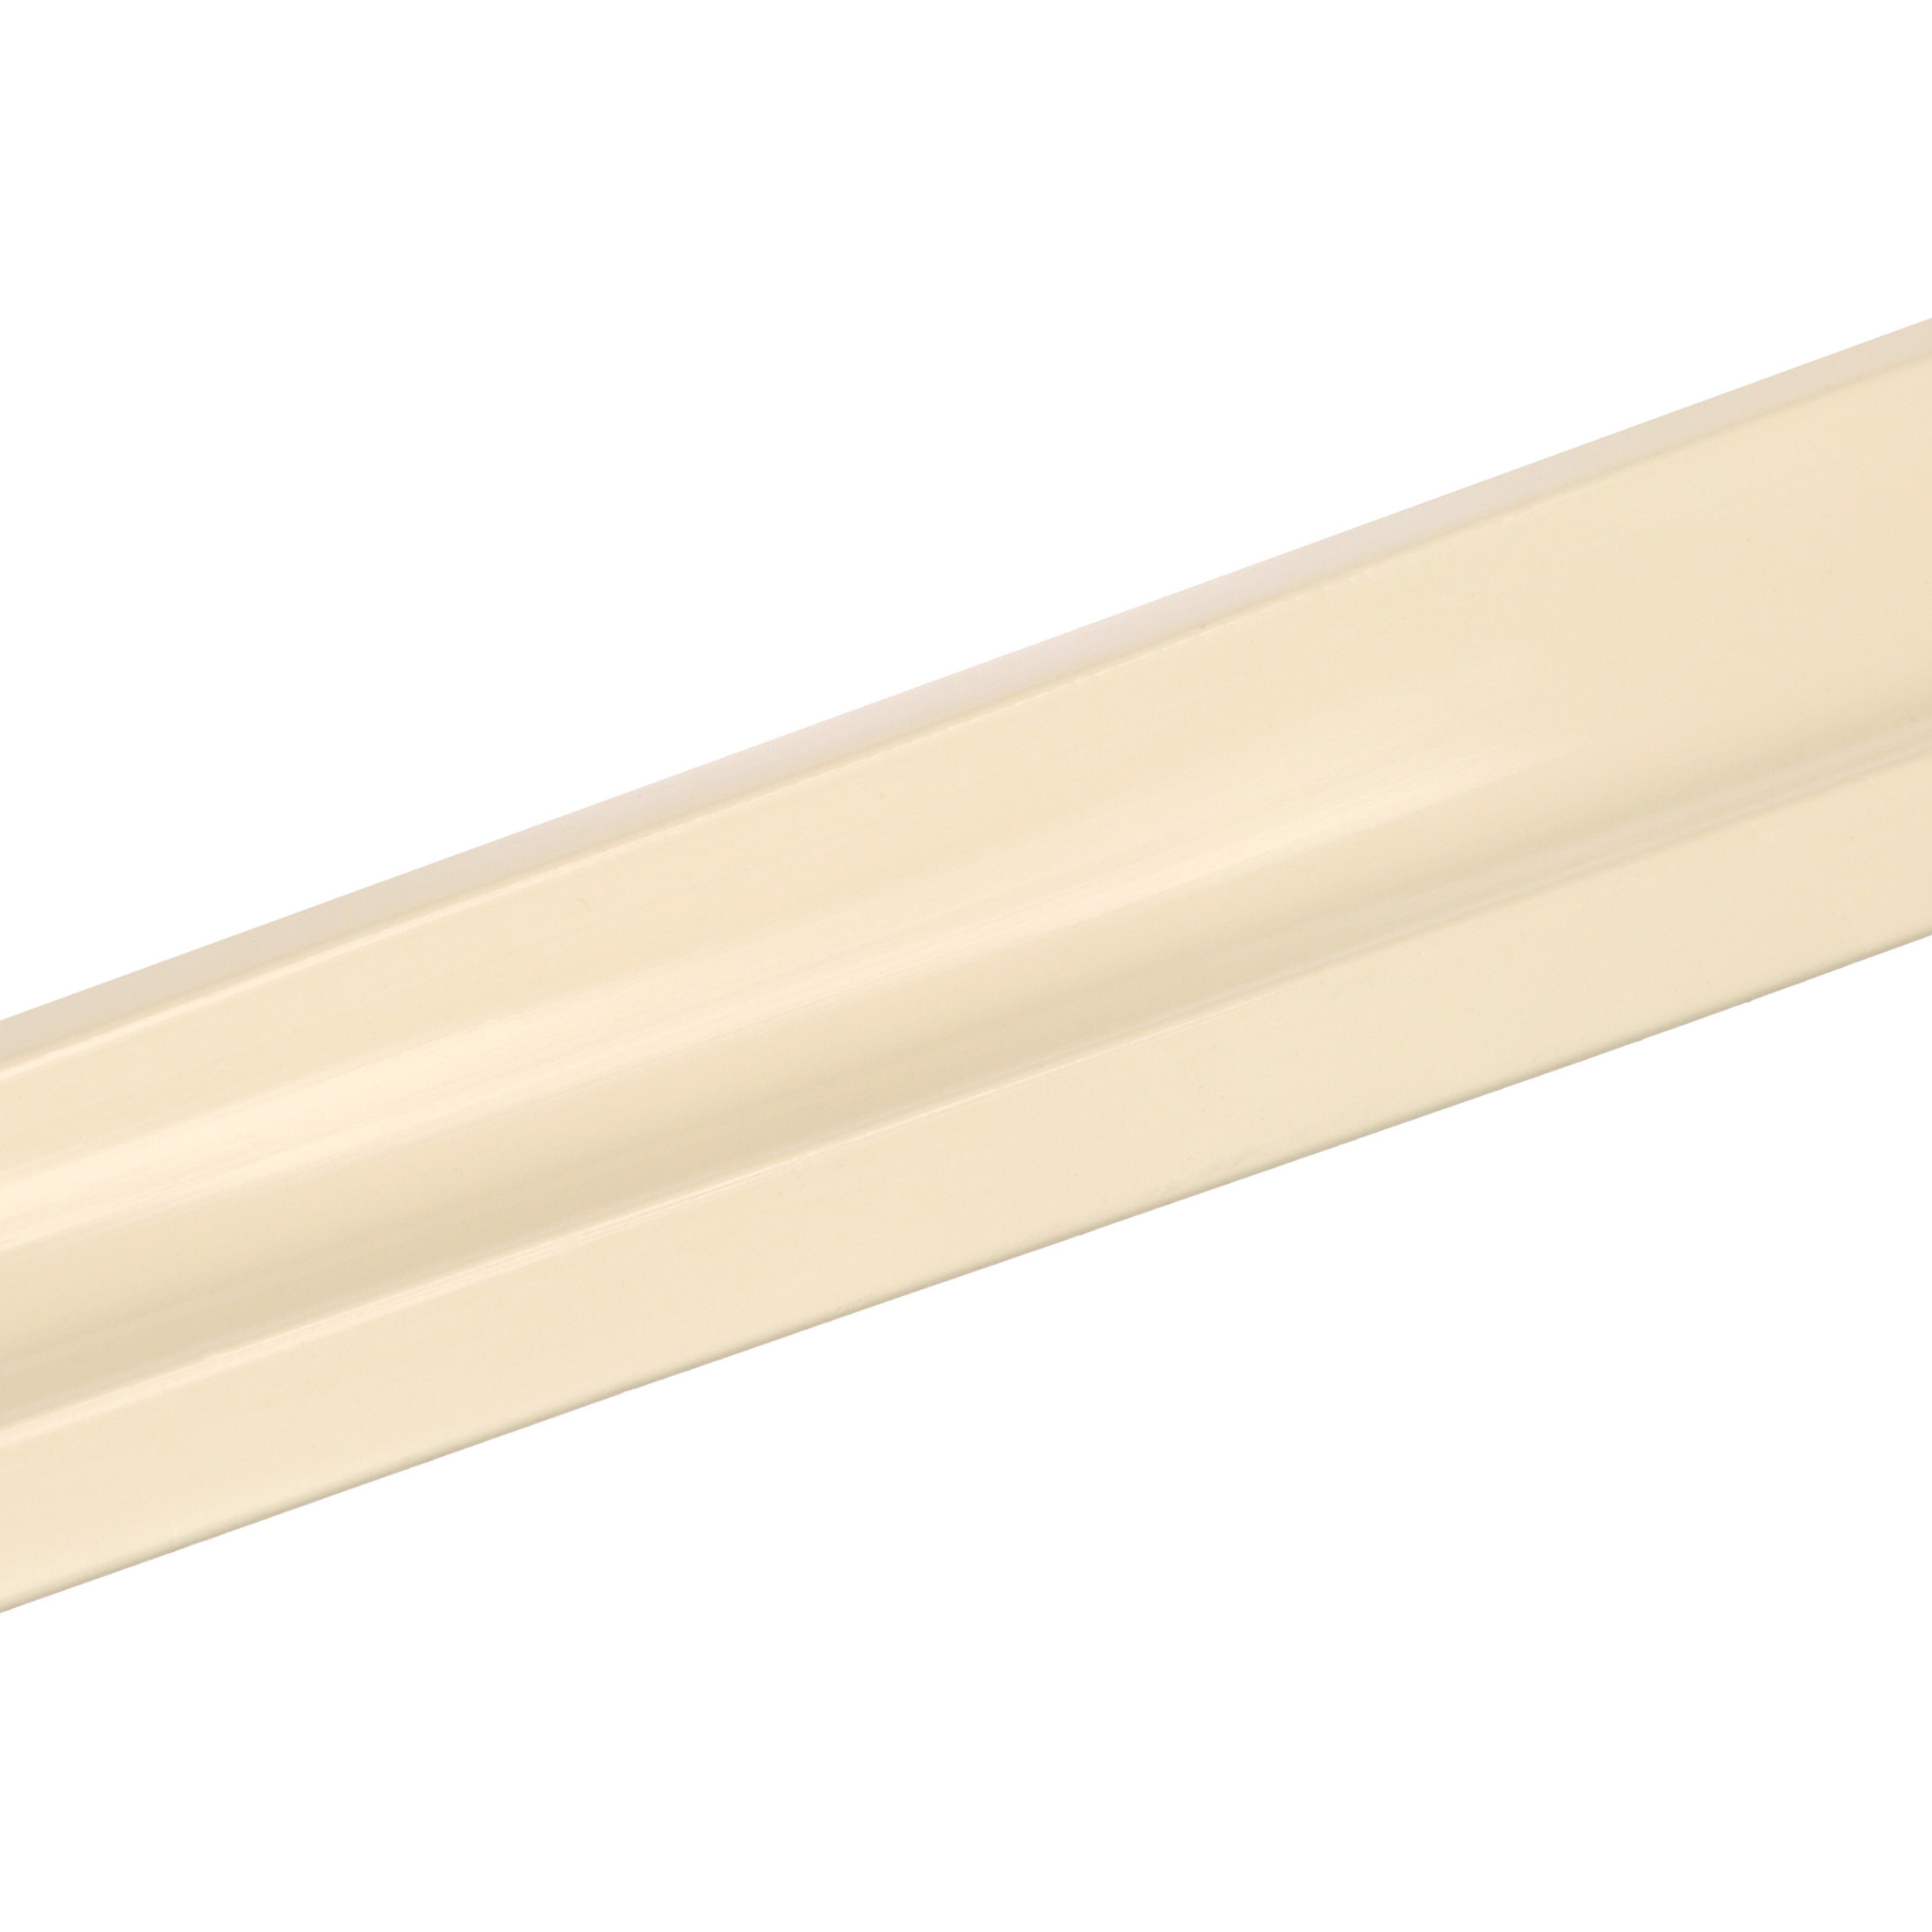 Camco 25222 - Colonial White Vinyl Trim Insert - image 3 of 7